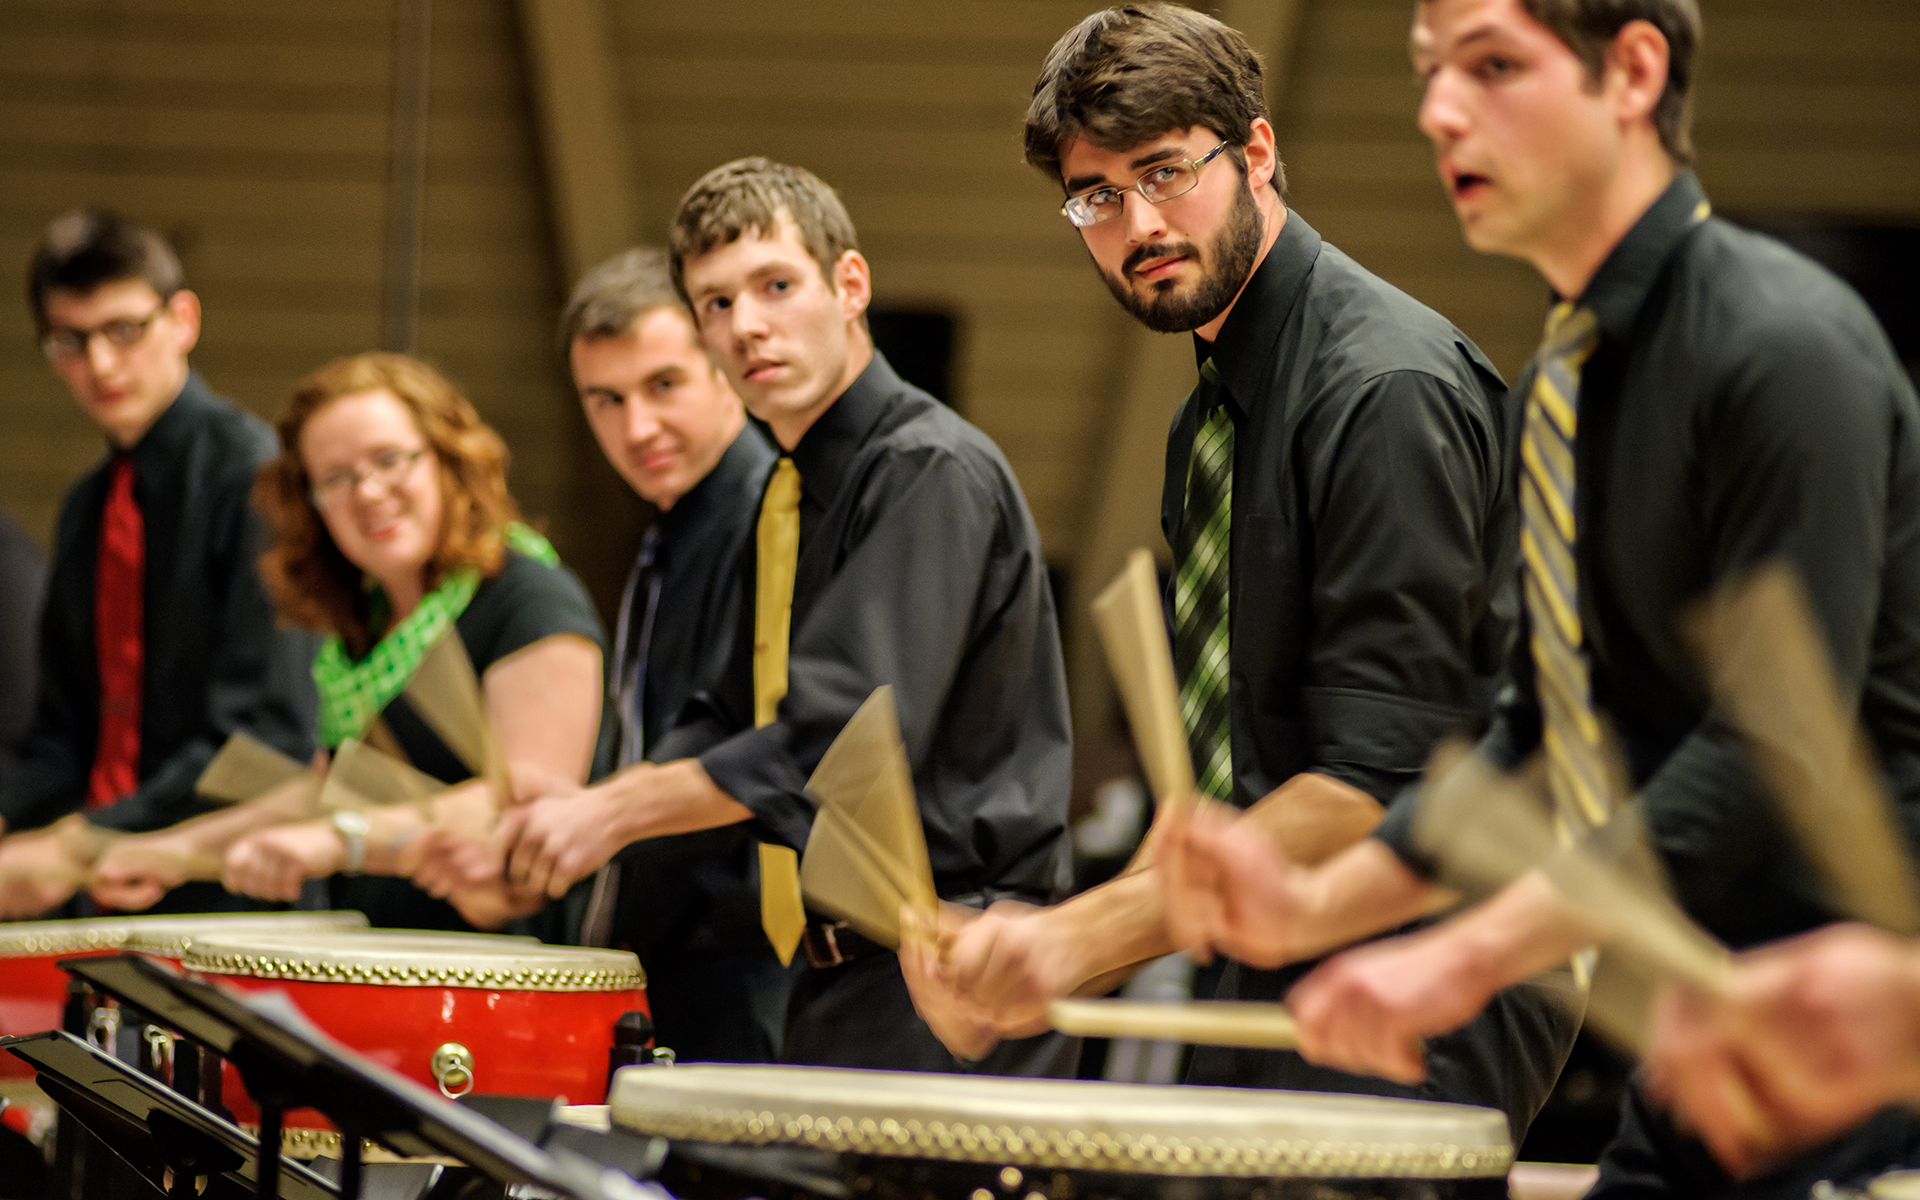 percussionists in concert